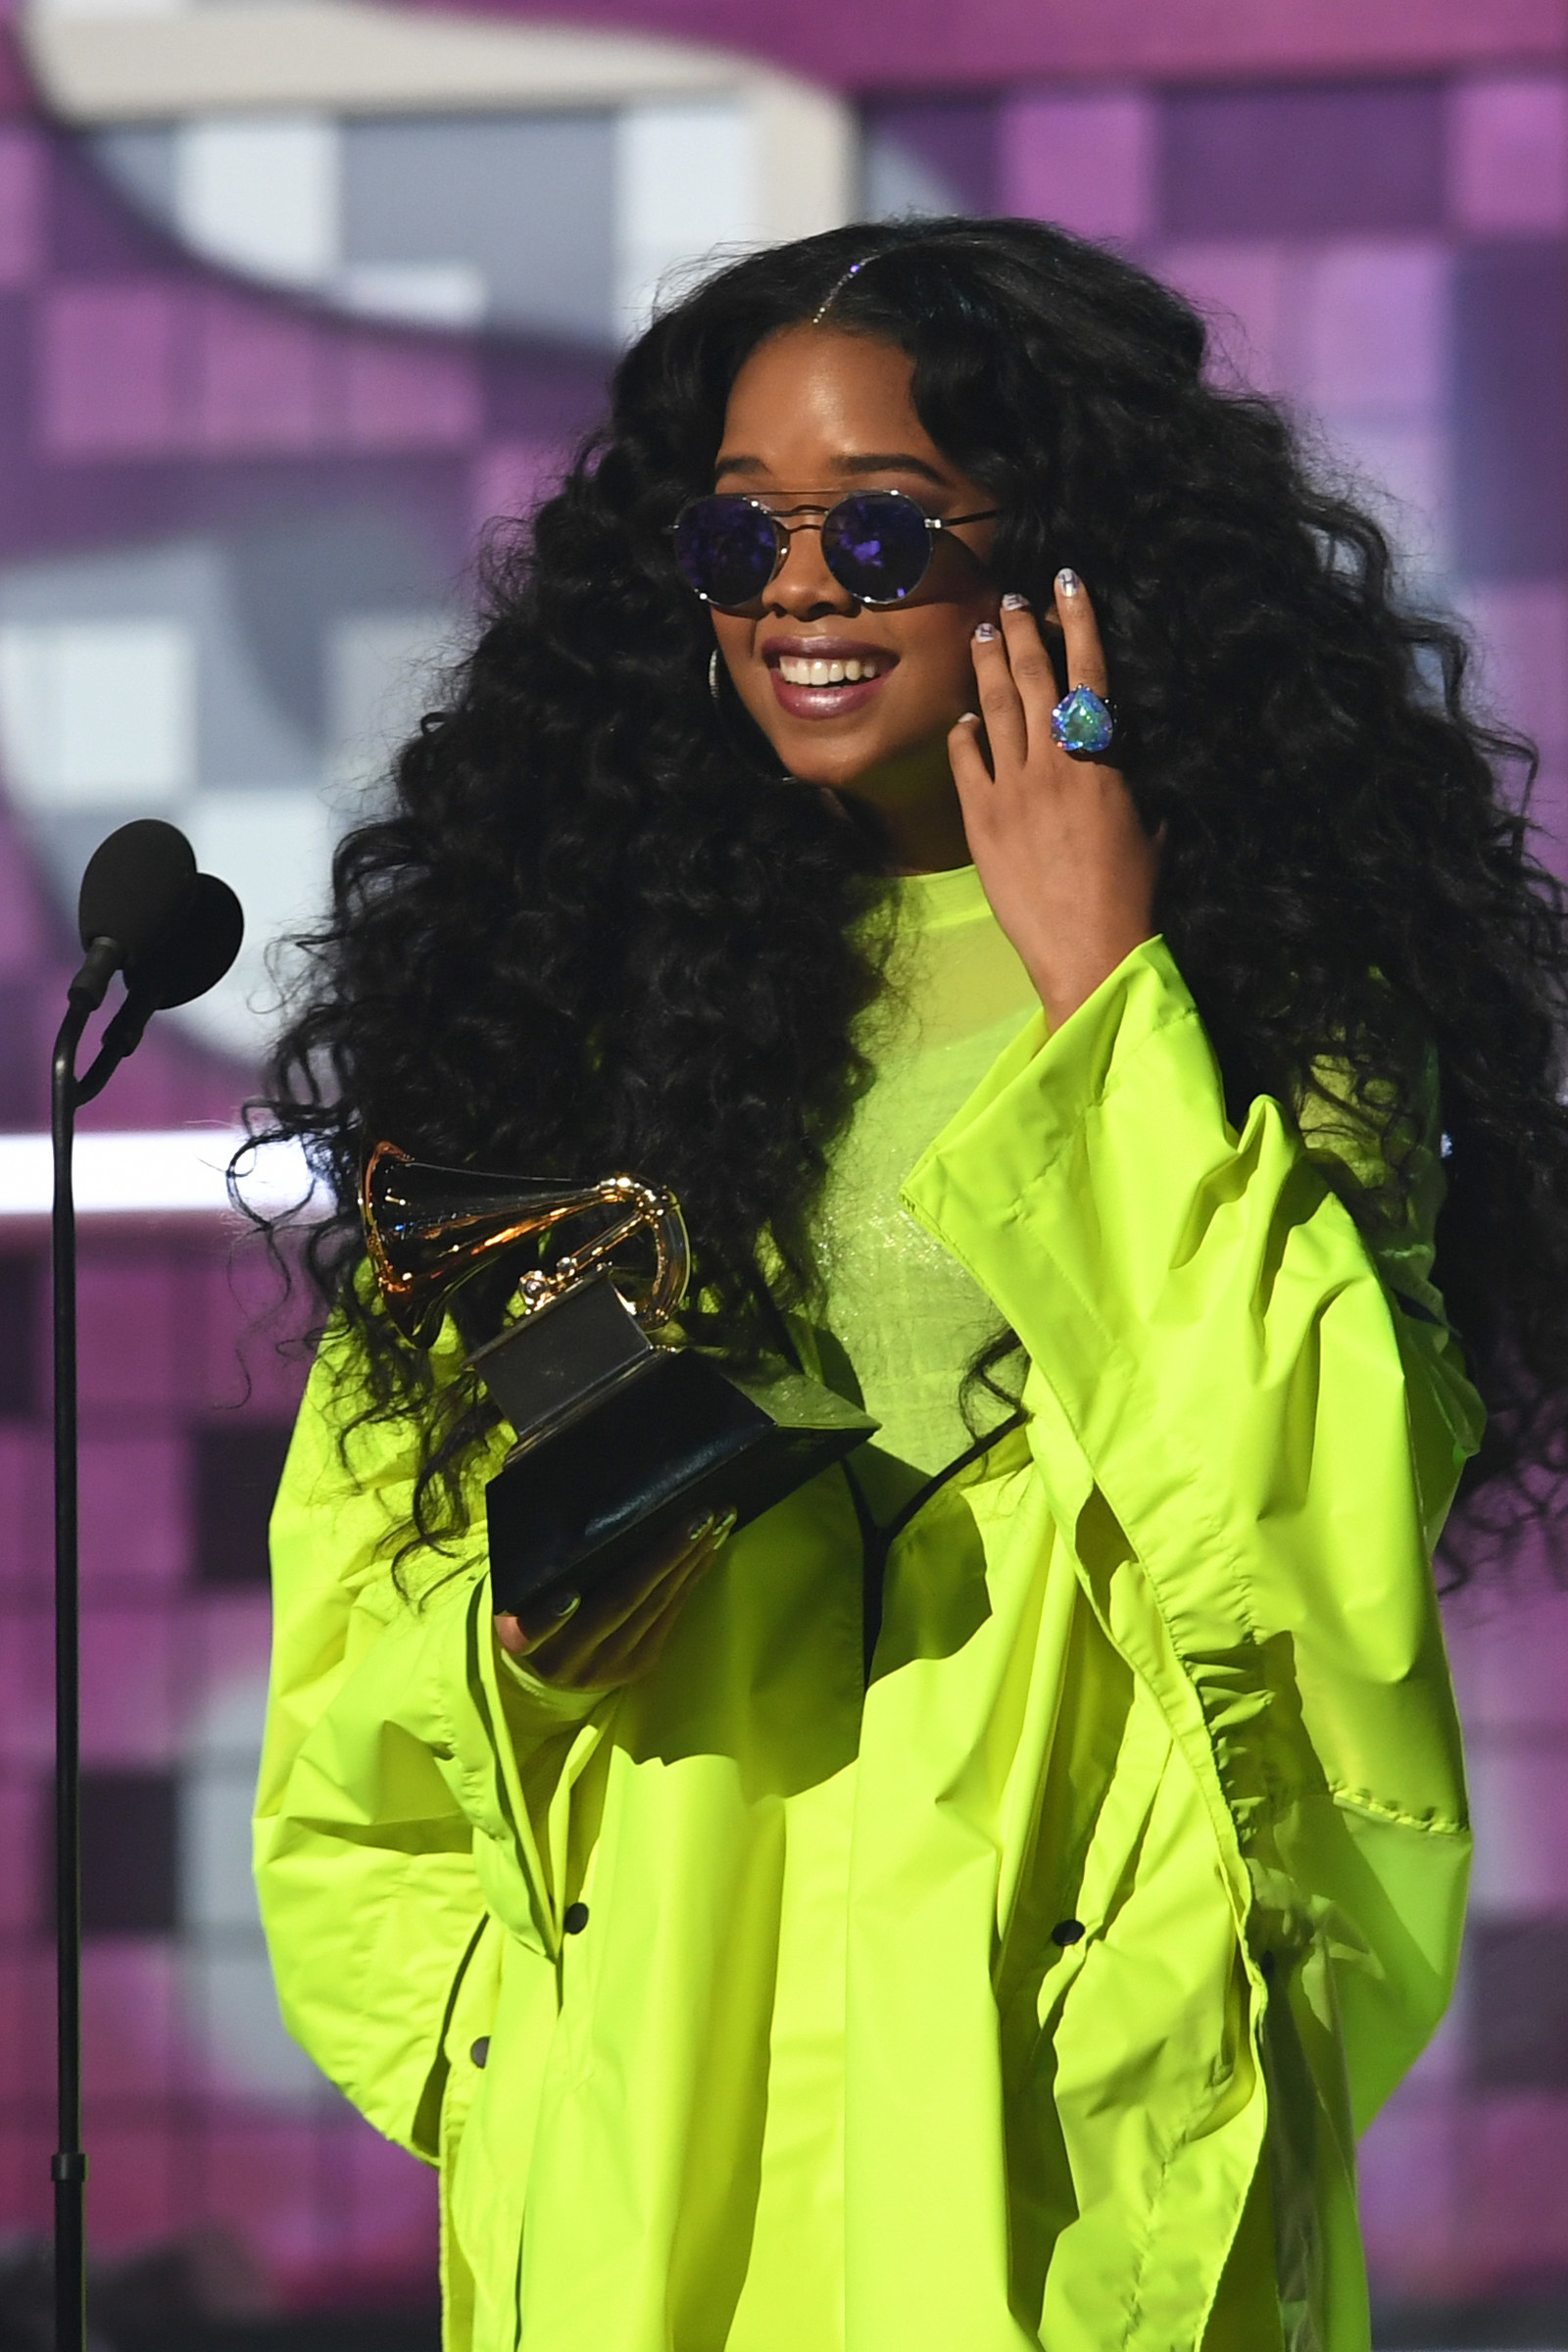 All The Winners At The 2019 Grammy Awards1600 x 2400